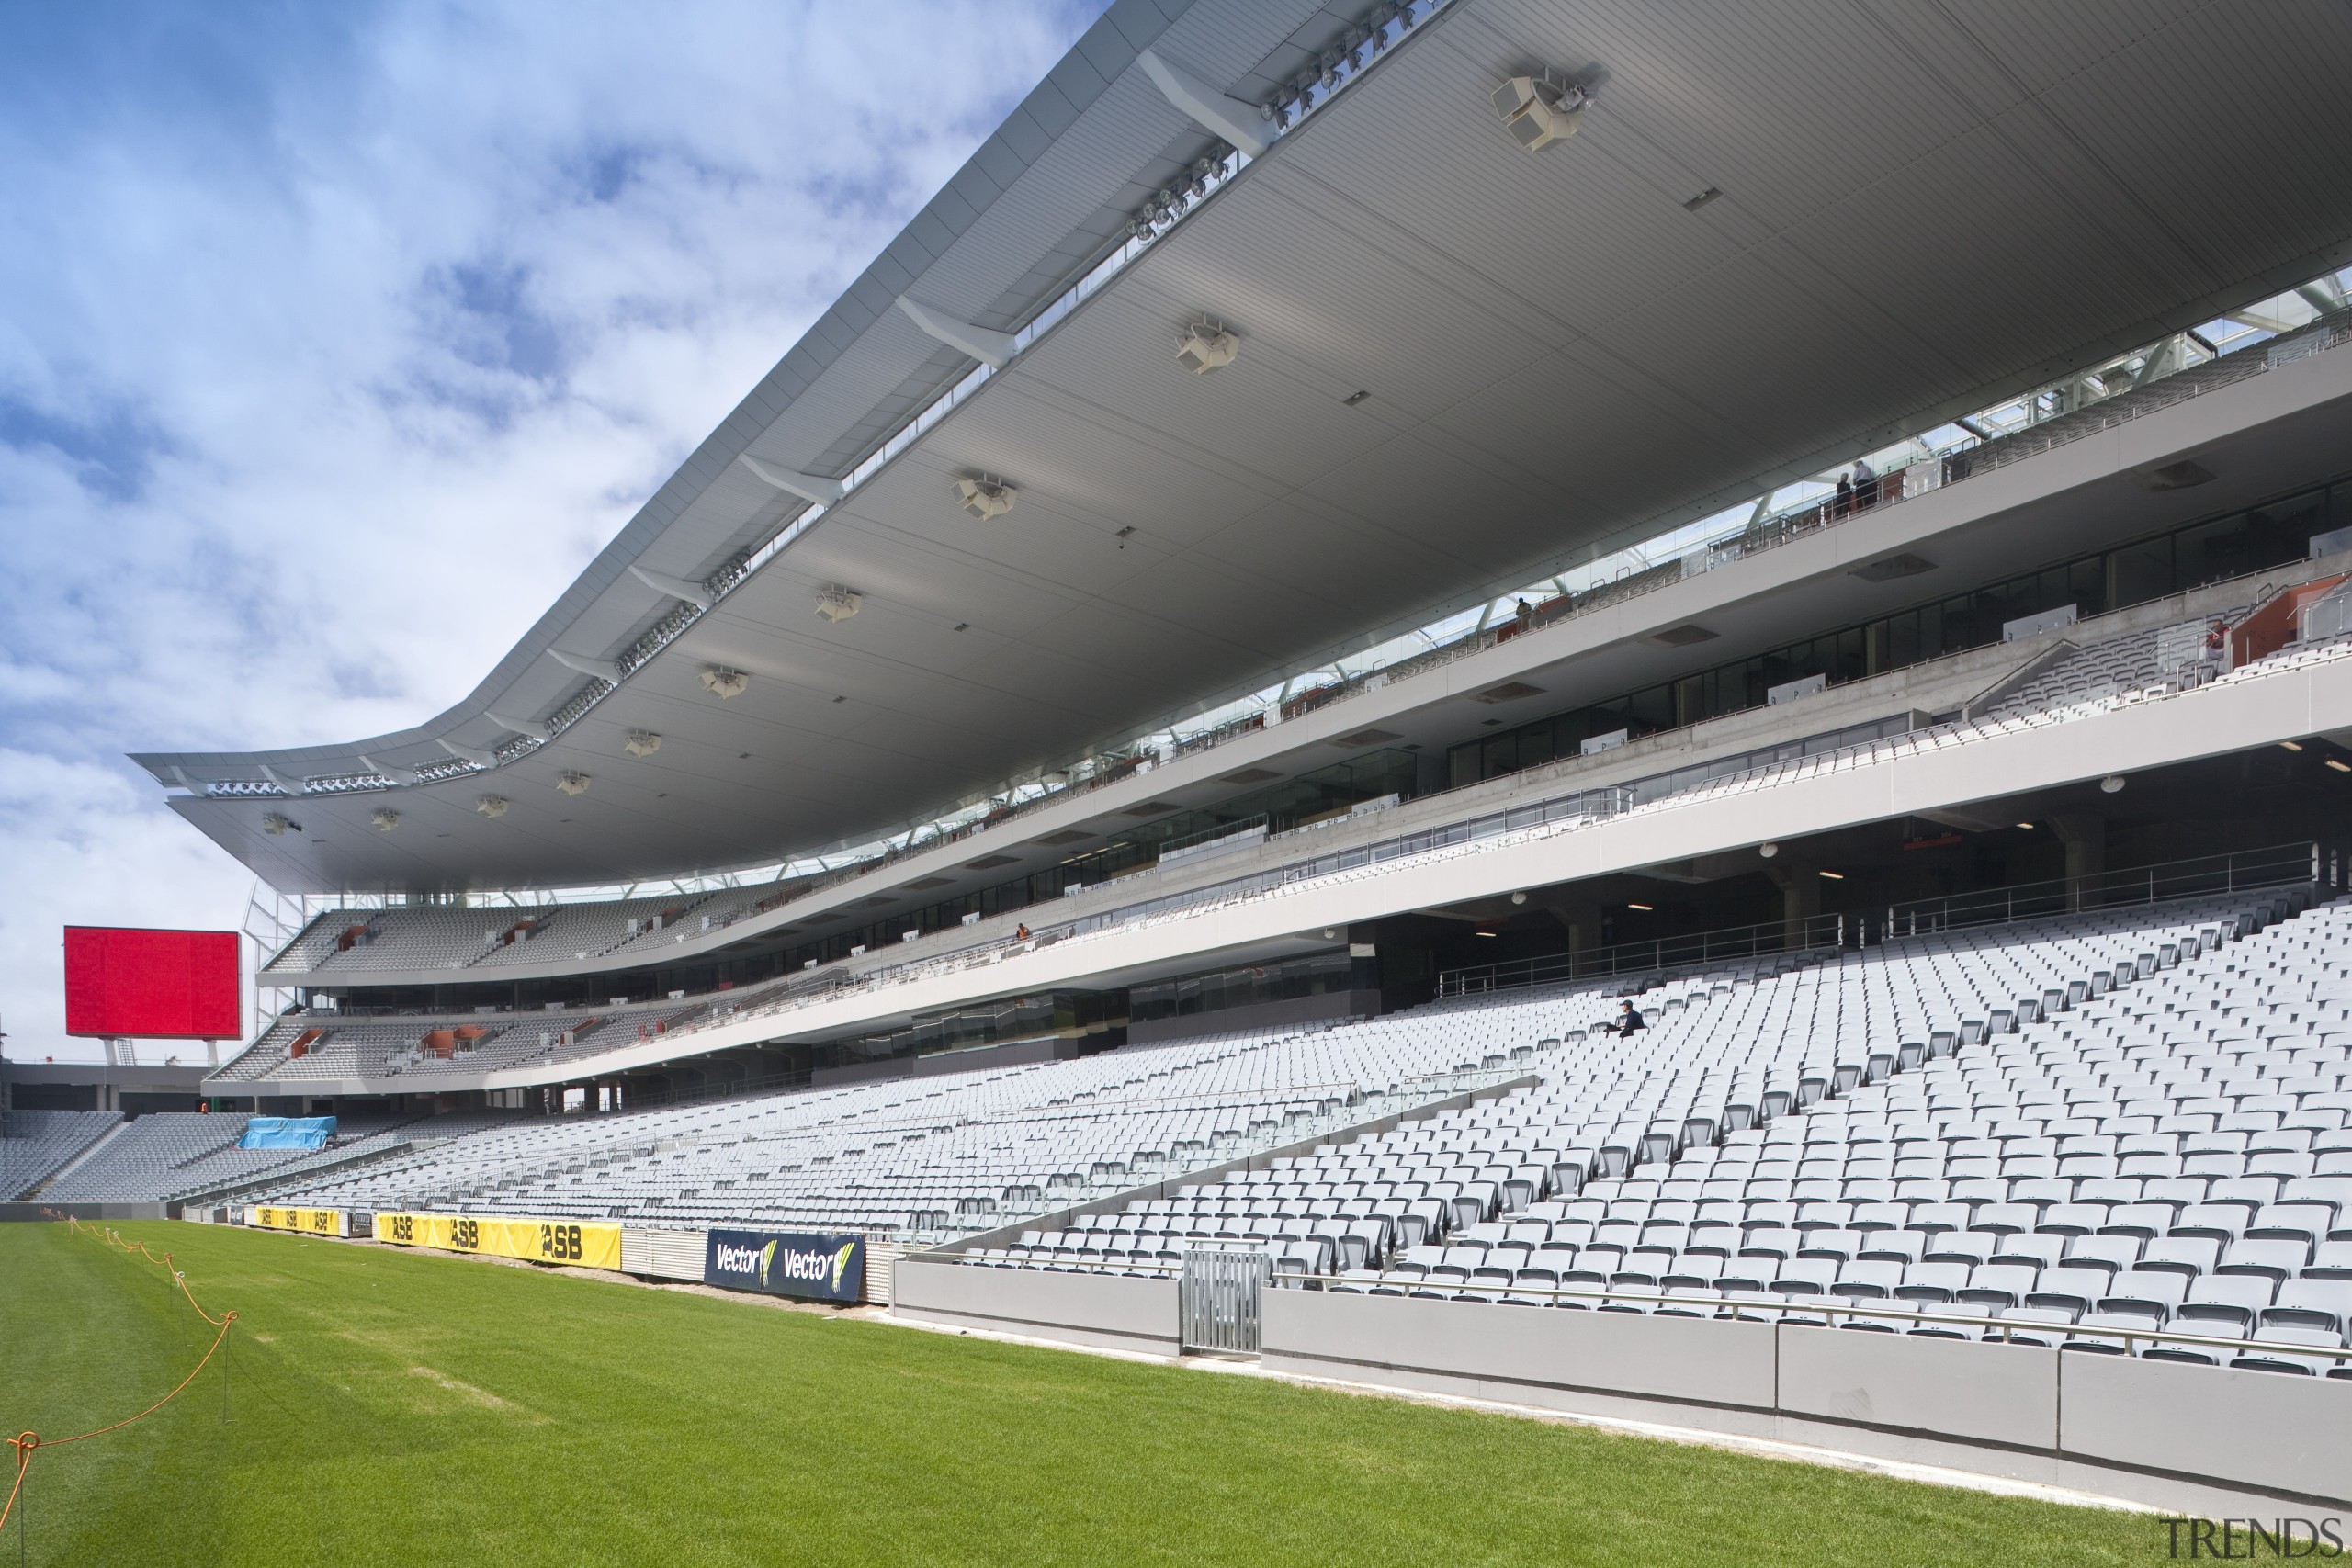 View of the rebuilt South Stand at Eden arena, atmosphere, atmosphere of earth, sky, soccer specific stadium, sport venue, stadium, structure, gray, white